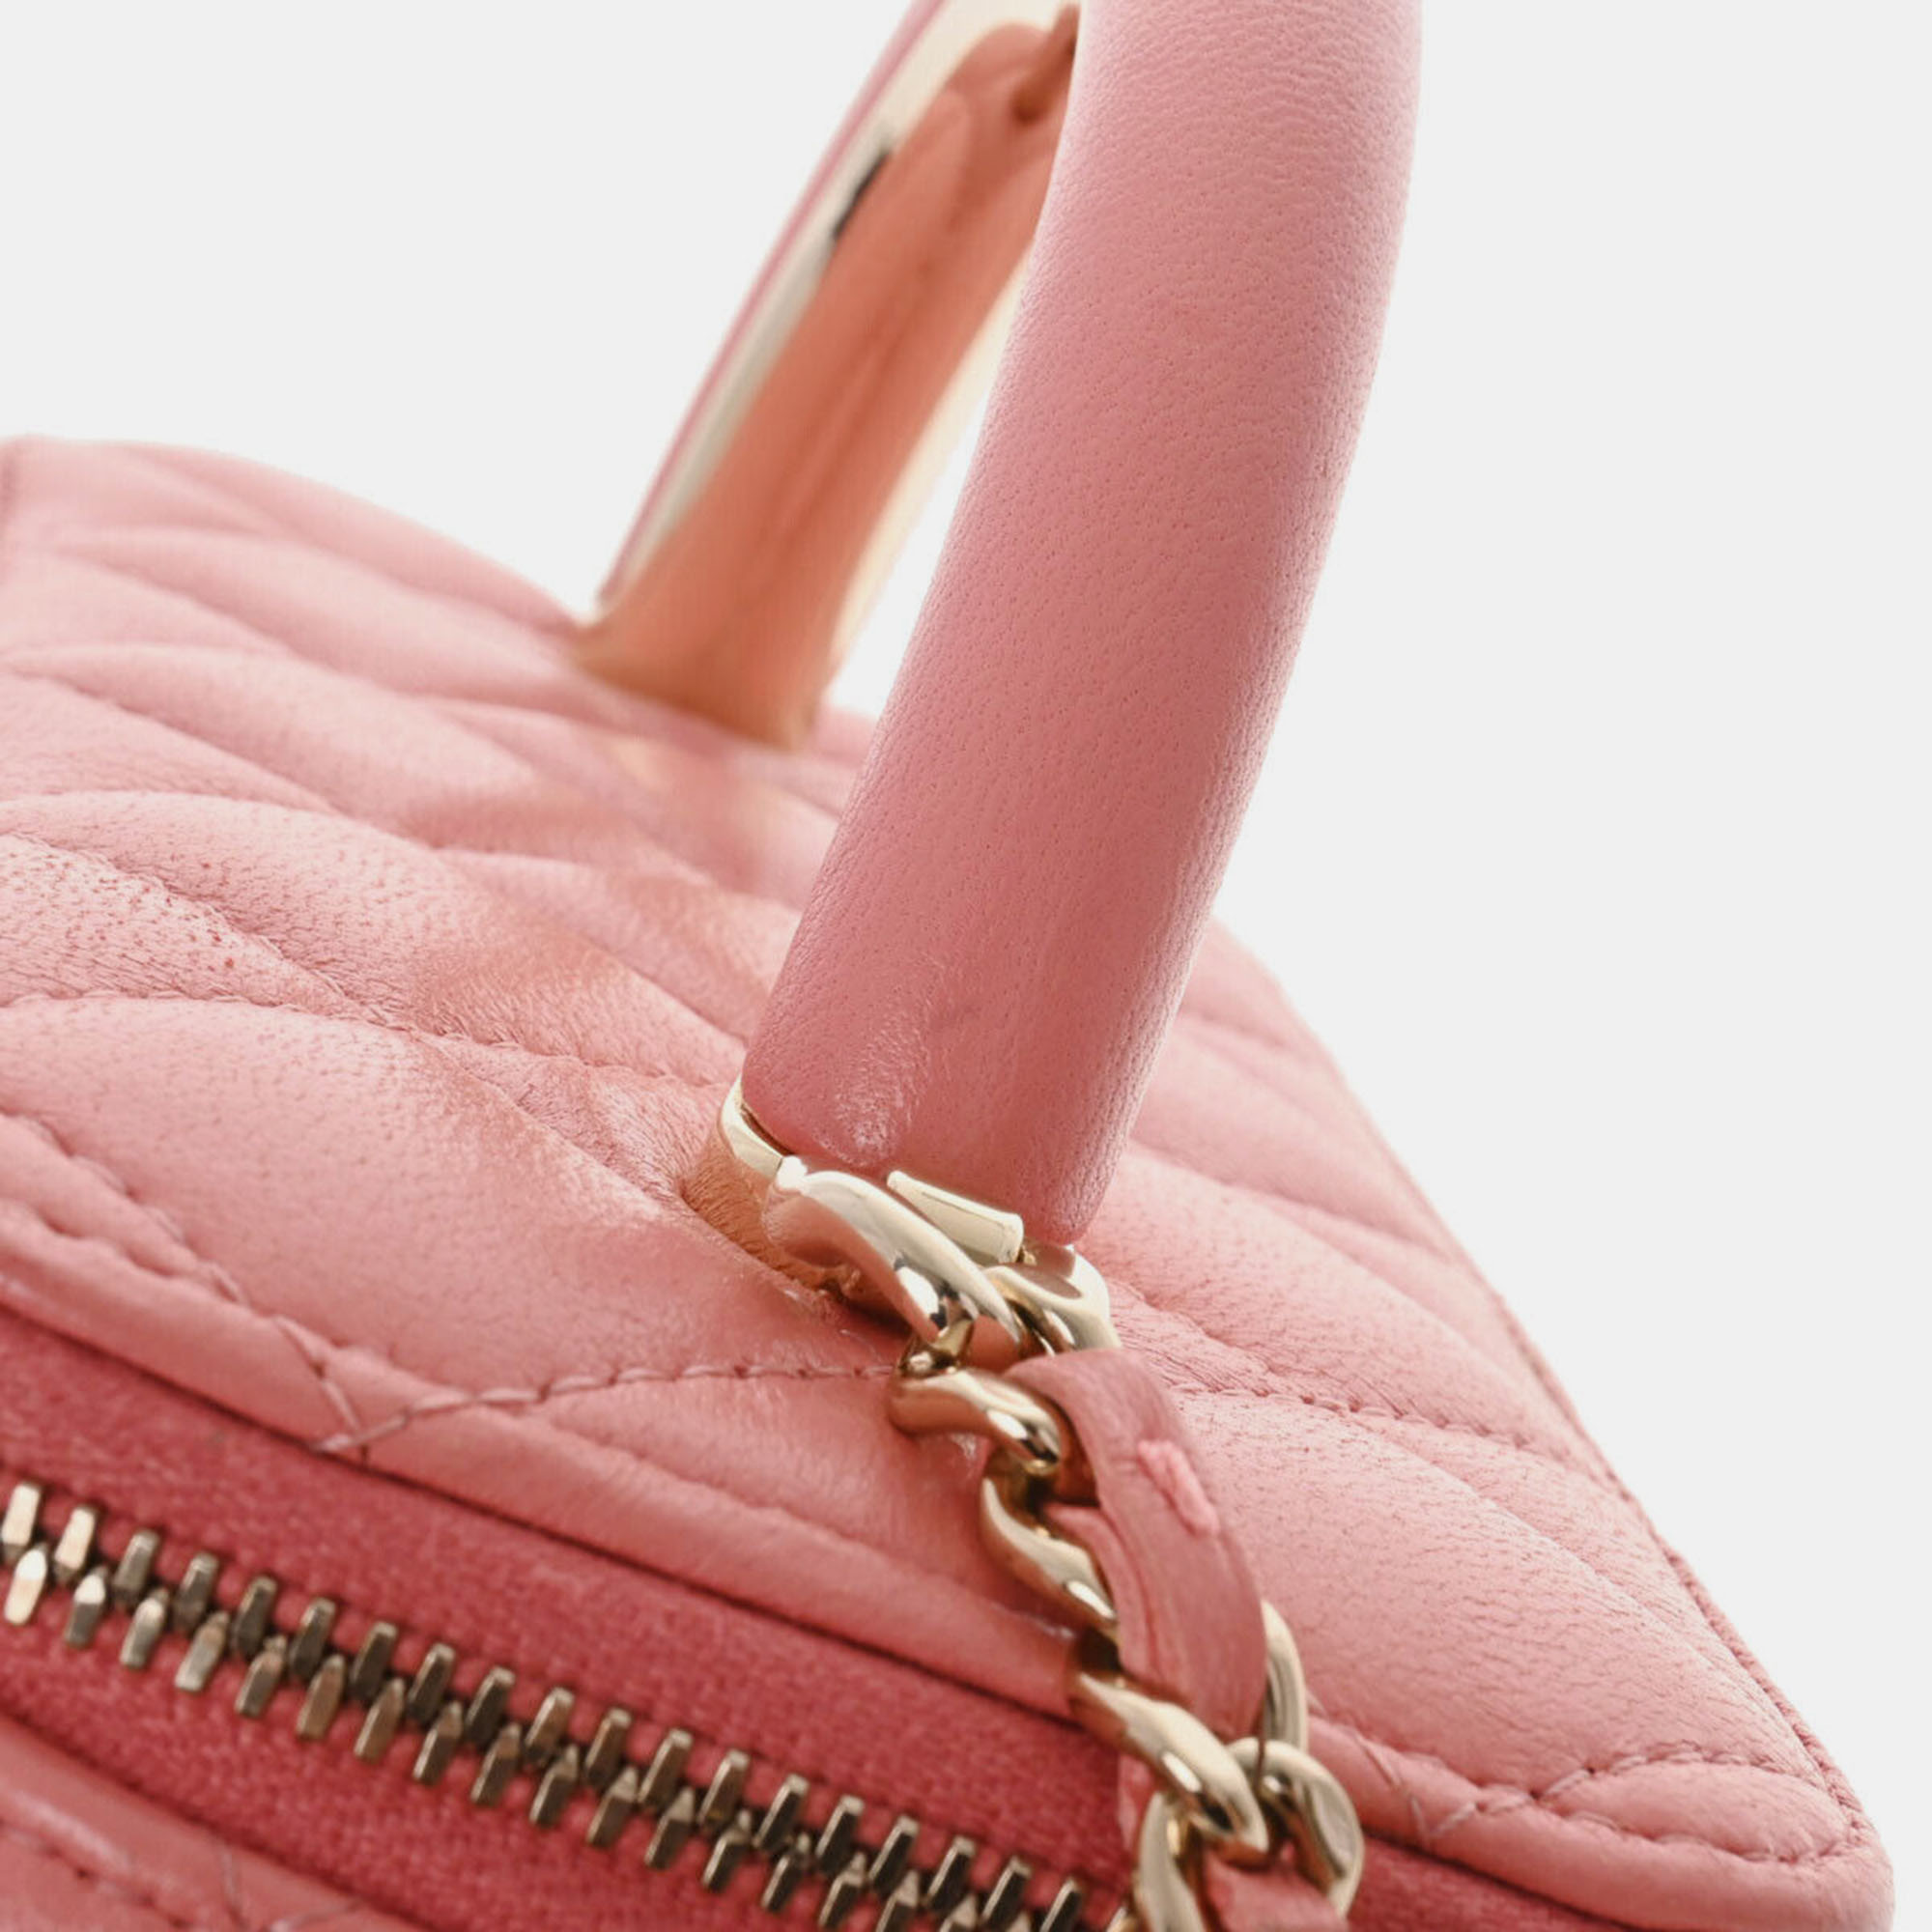 Chanel Pink Leather Vanity Case